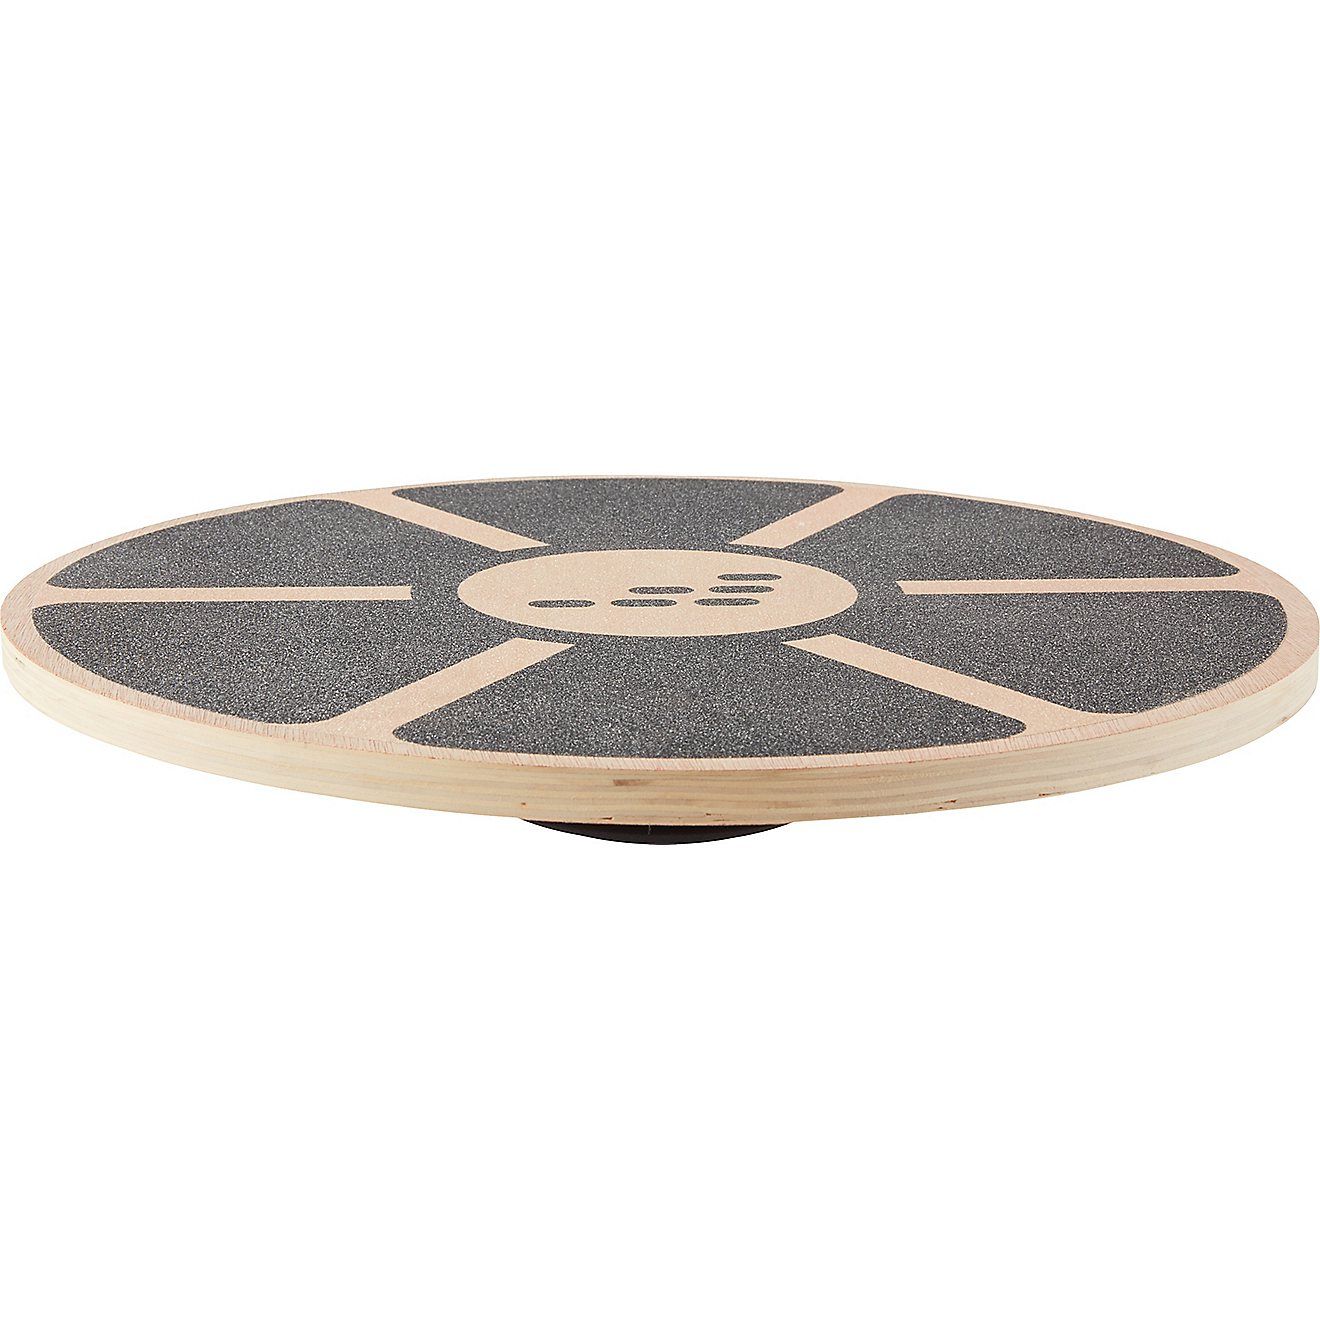 BCG Wobble Board | Academy Sports + Outdoor Affiliate